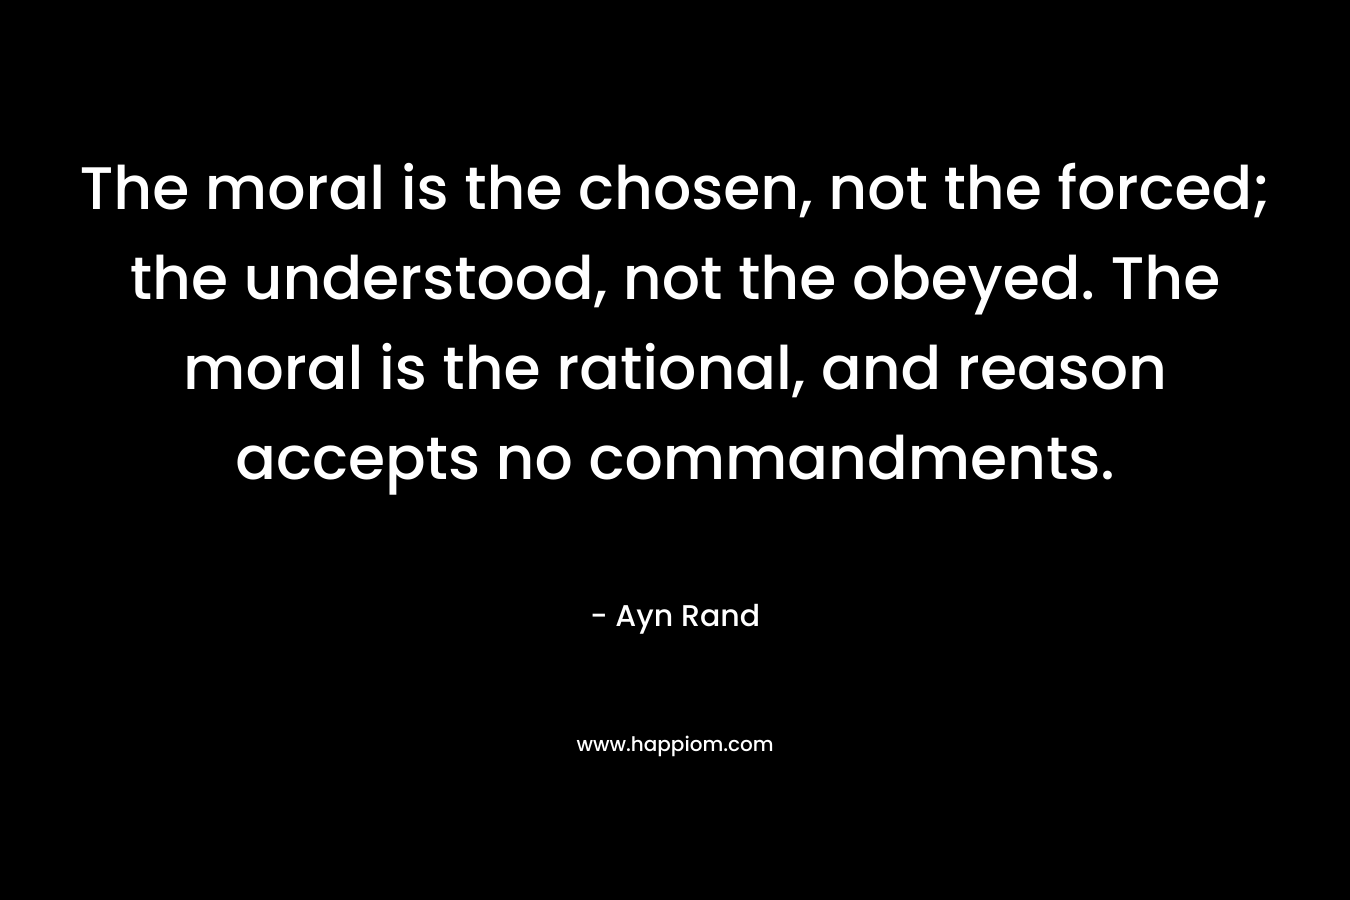 The moral is the chosen, not the forced; the understood, not the obeyed. The moral is the rational, and reason accepts no commandments. – Ayn Rand